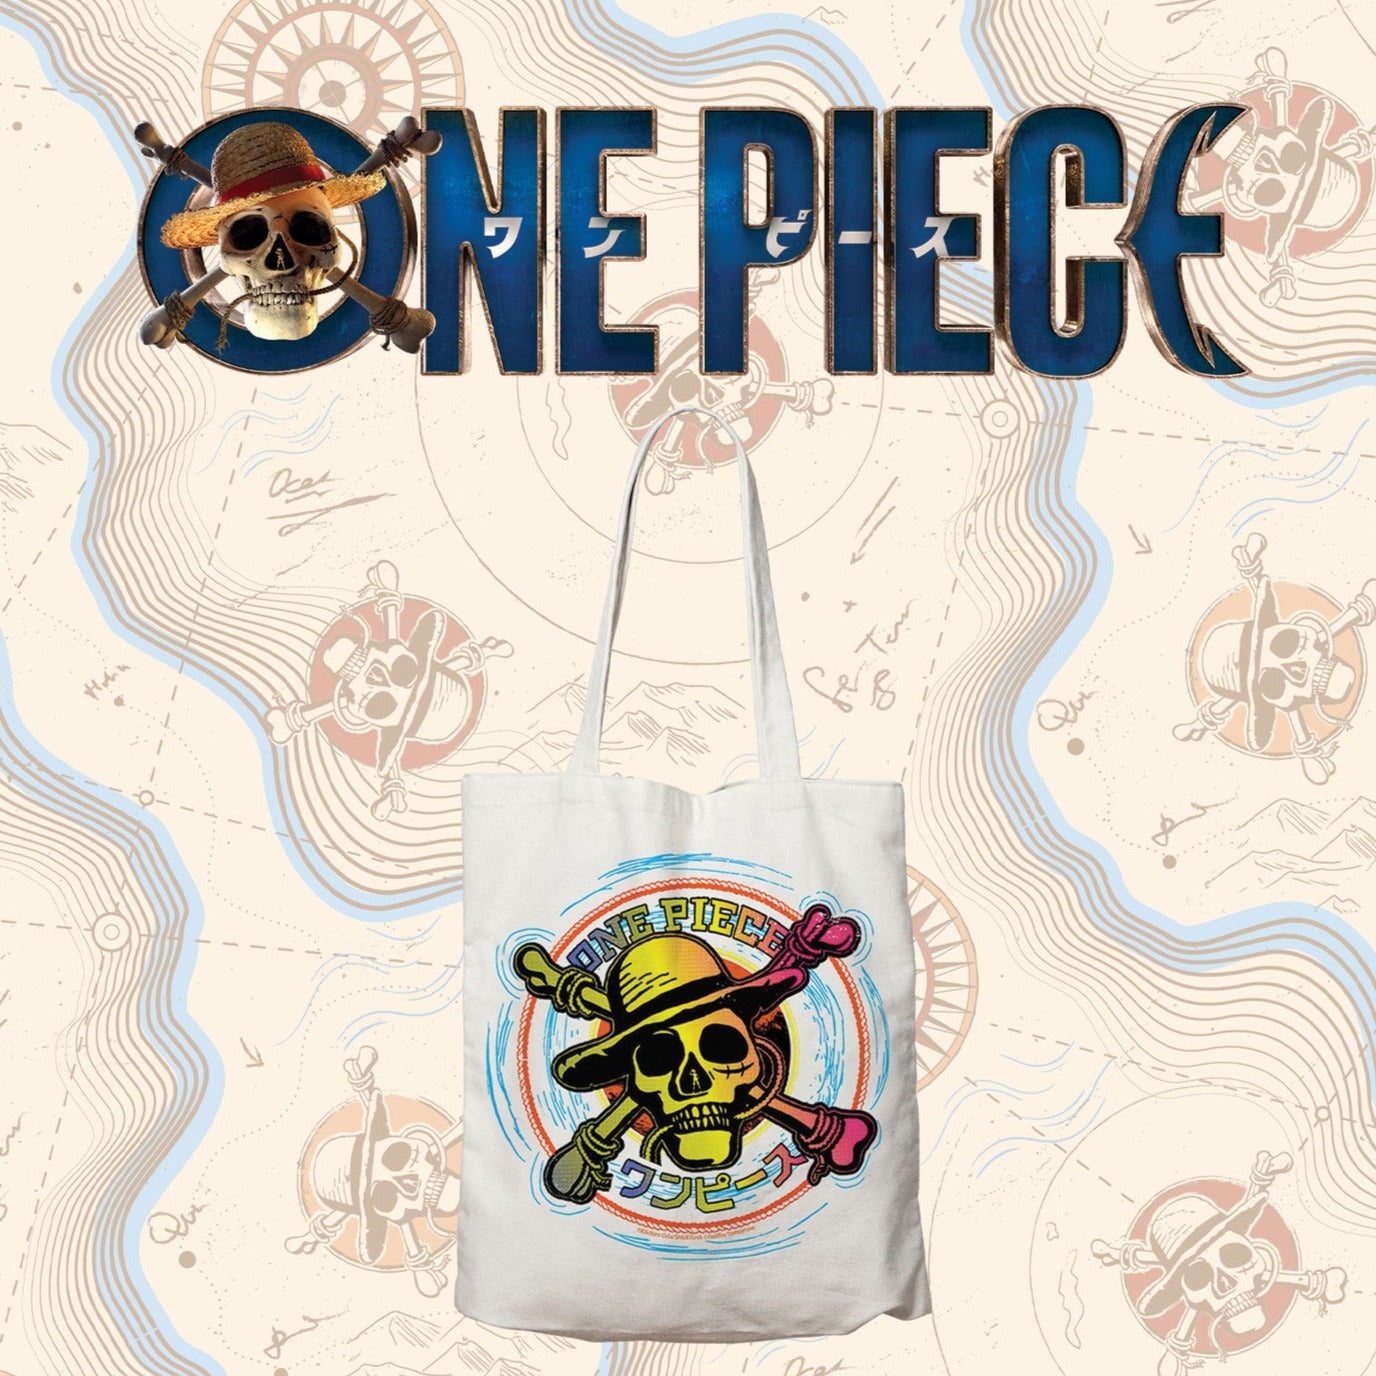 One Piece Tote Bag